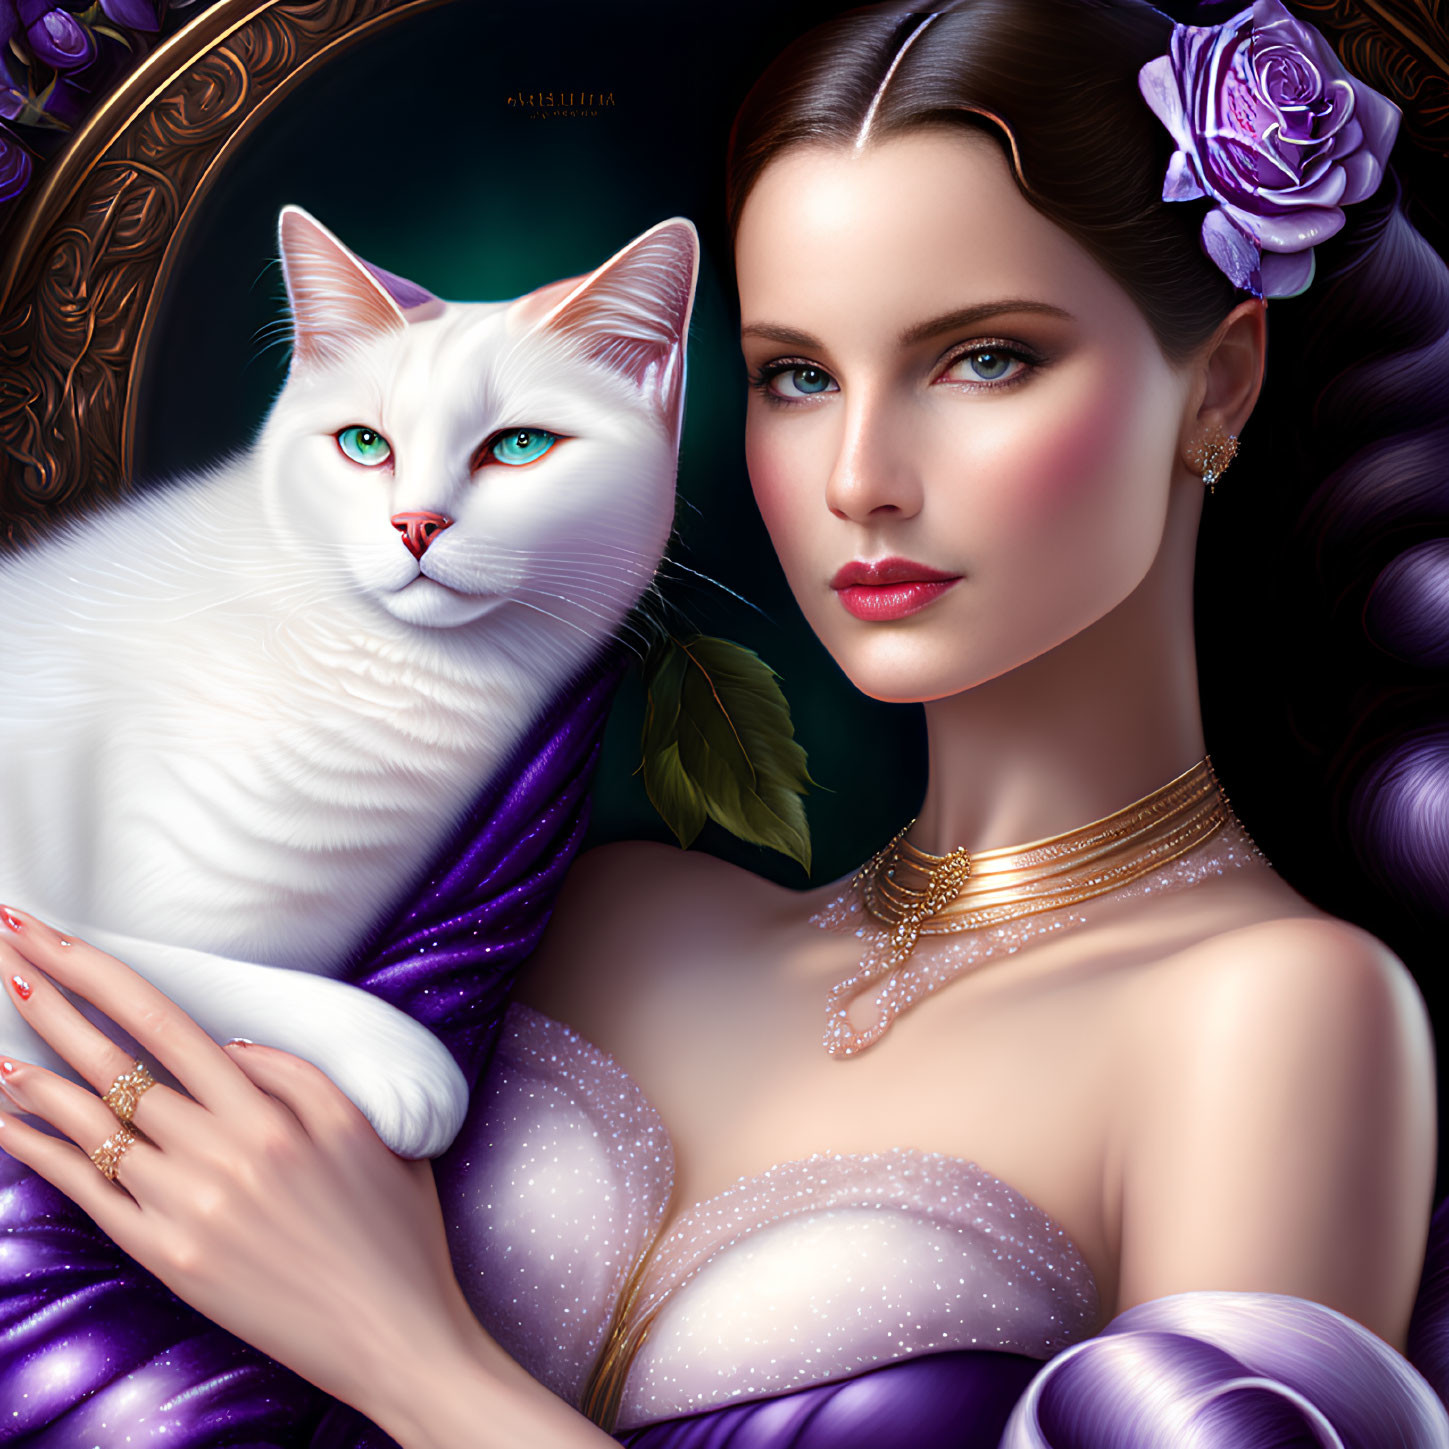 Illustrated woman in purple dress with white cat and blue eyes, gold jewelry, and flower.